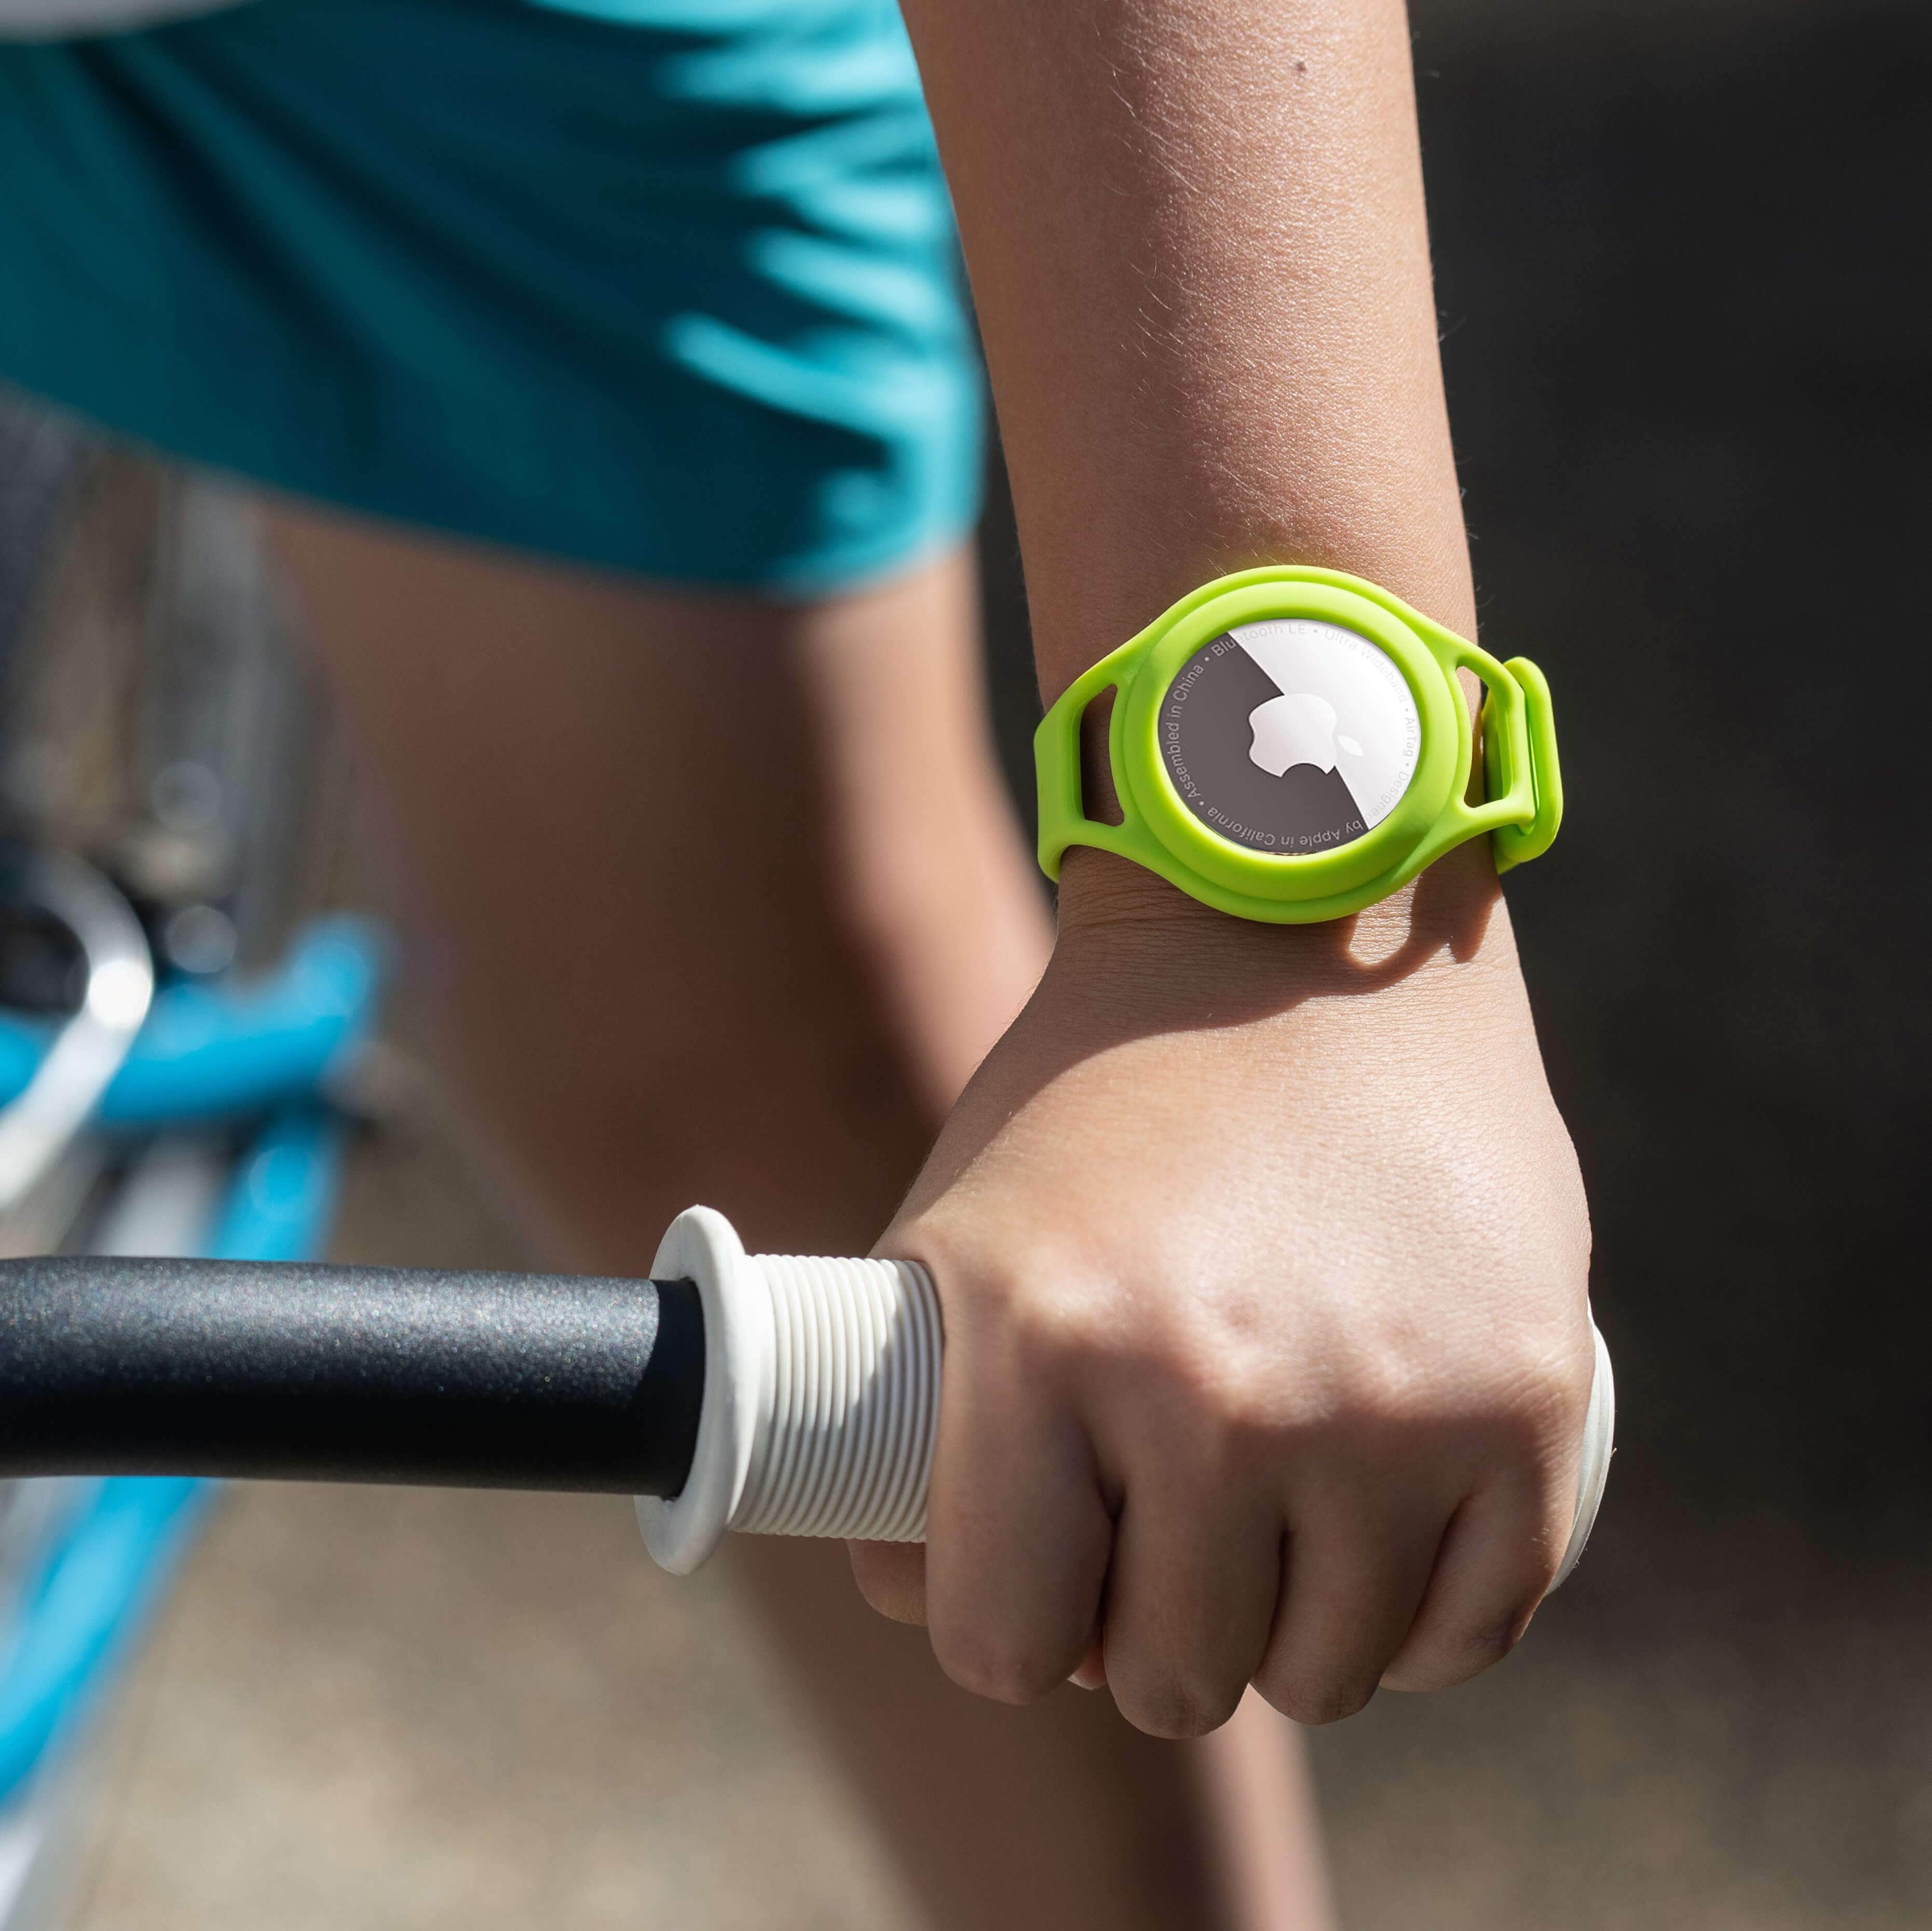 Kid riding a bike while wearing Lime Green AirTag bracelet on wrist. color::Lime Green